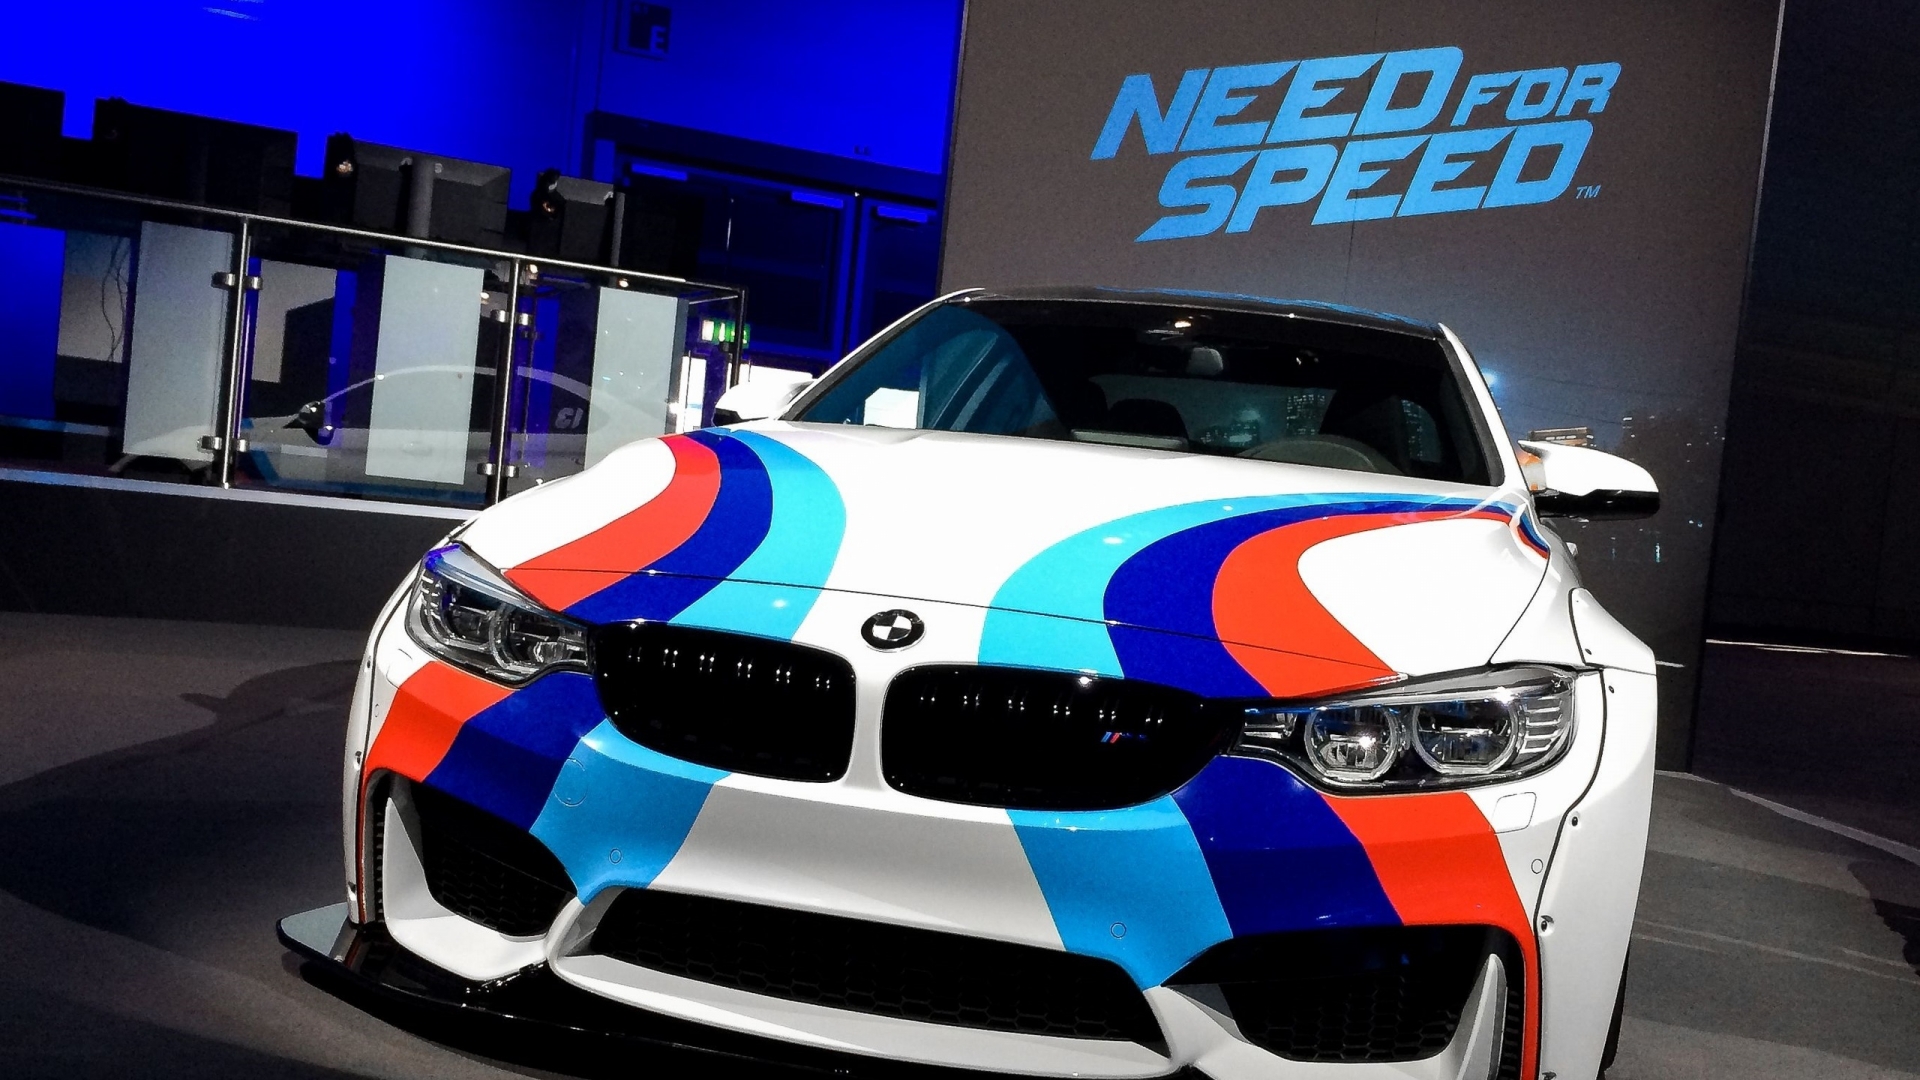 Need For Speed BMW for 1920 x 1080 HDTV 1080p resolution